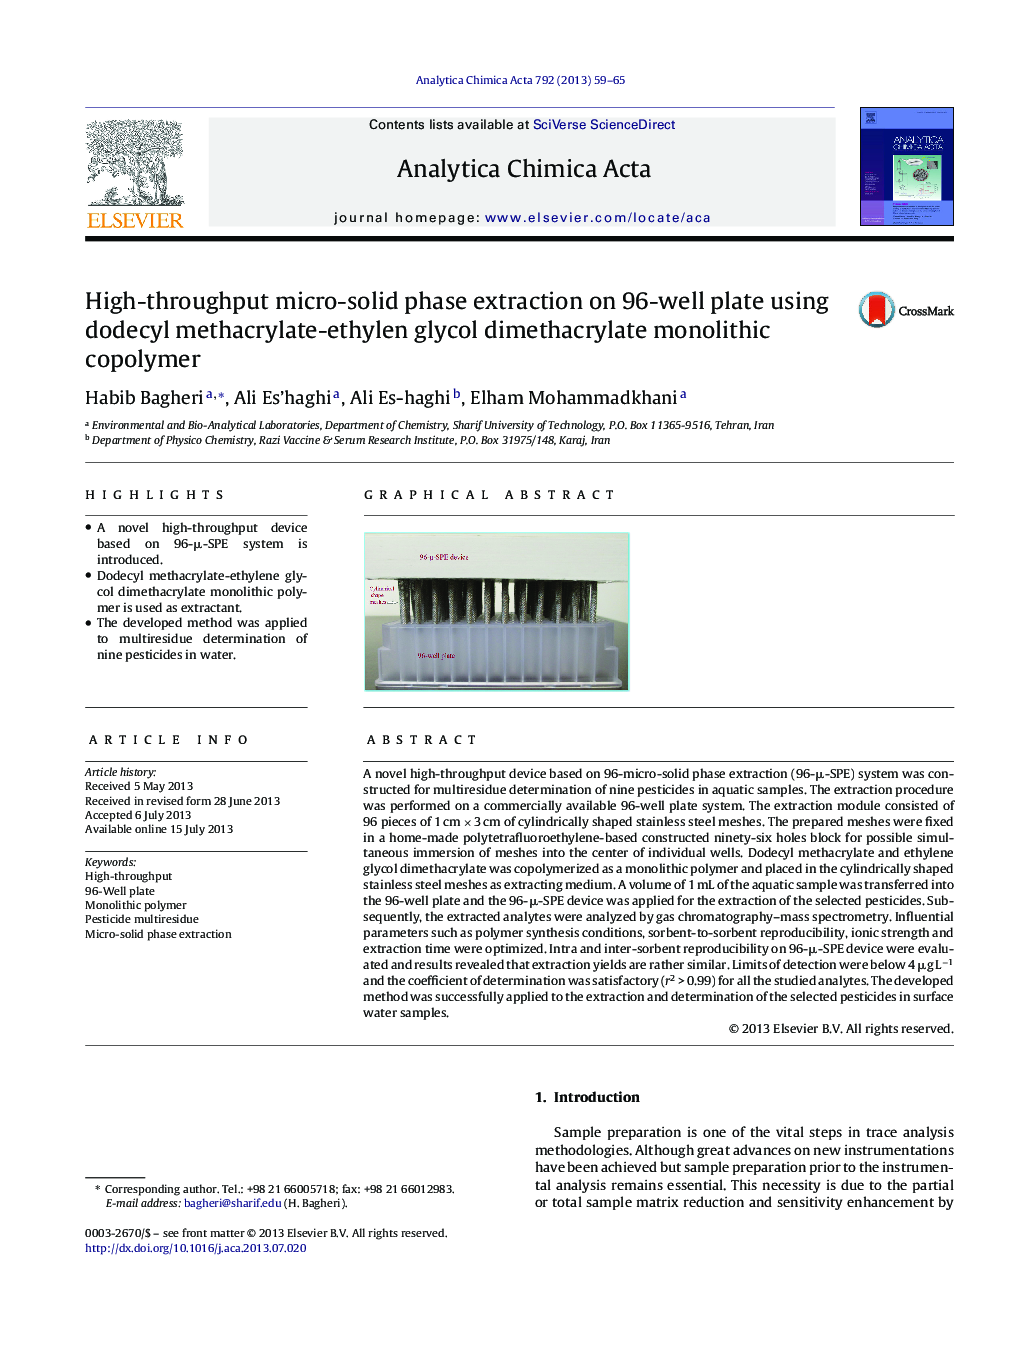 High-throughput micro-solid phase extraction on 96-well plate using dodecyl methacrylate-ethylen glycol dimethacrylate monolithic copolymer